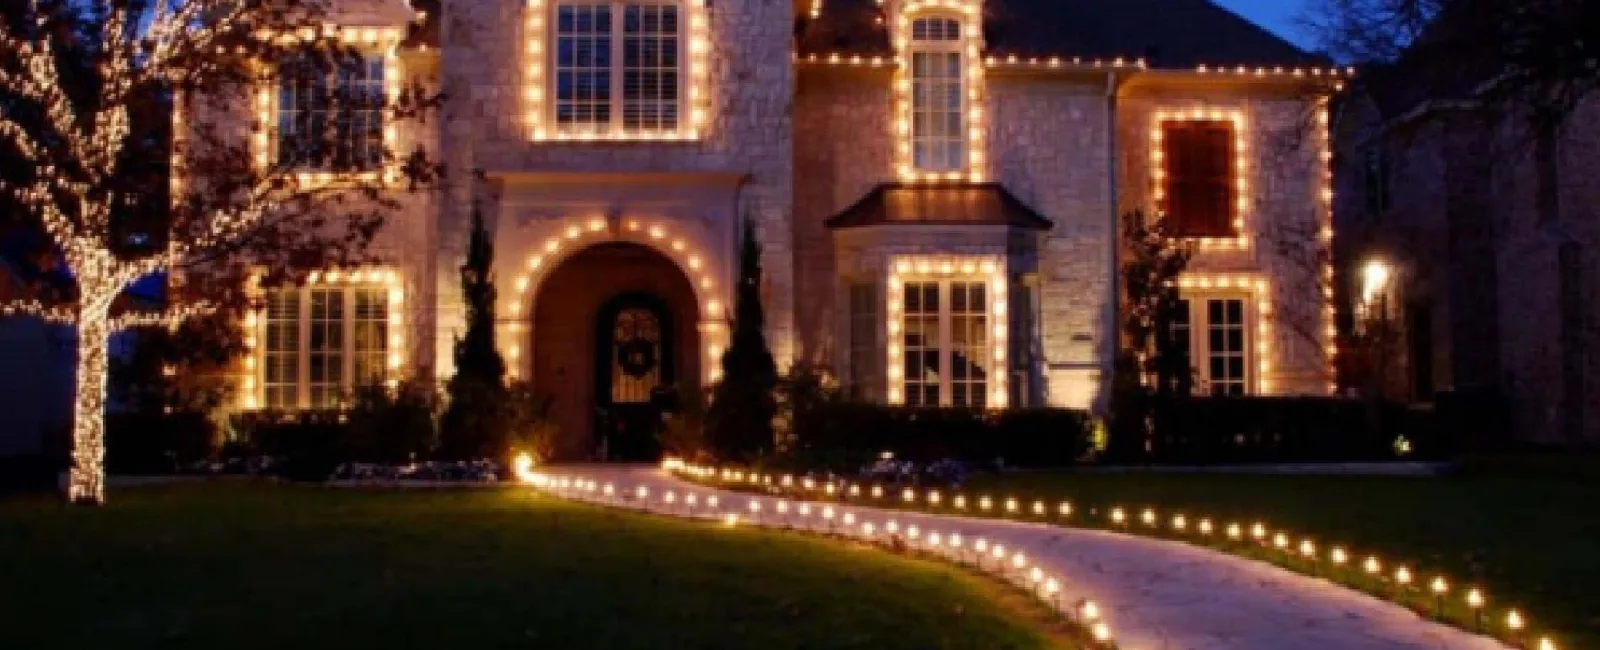 Decorate Your Home for The Holiday’s – Safely